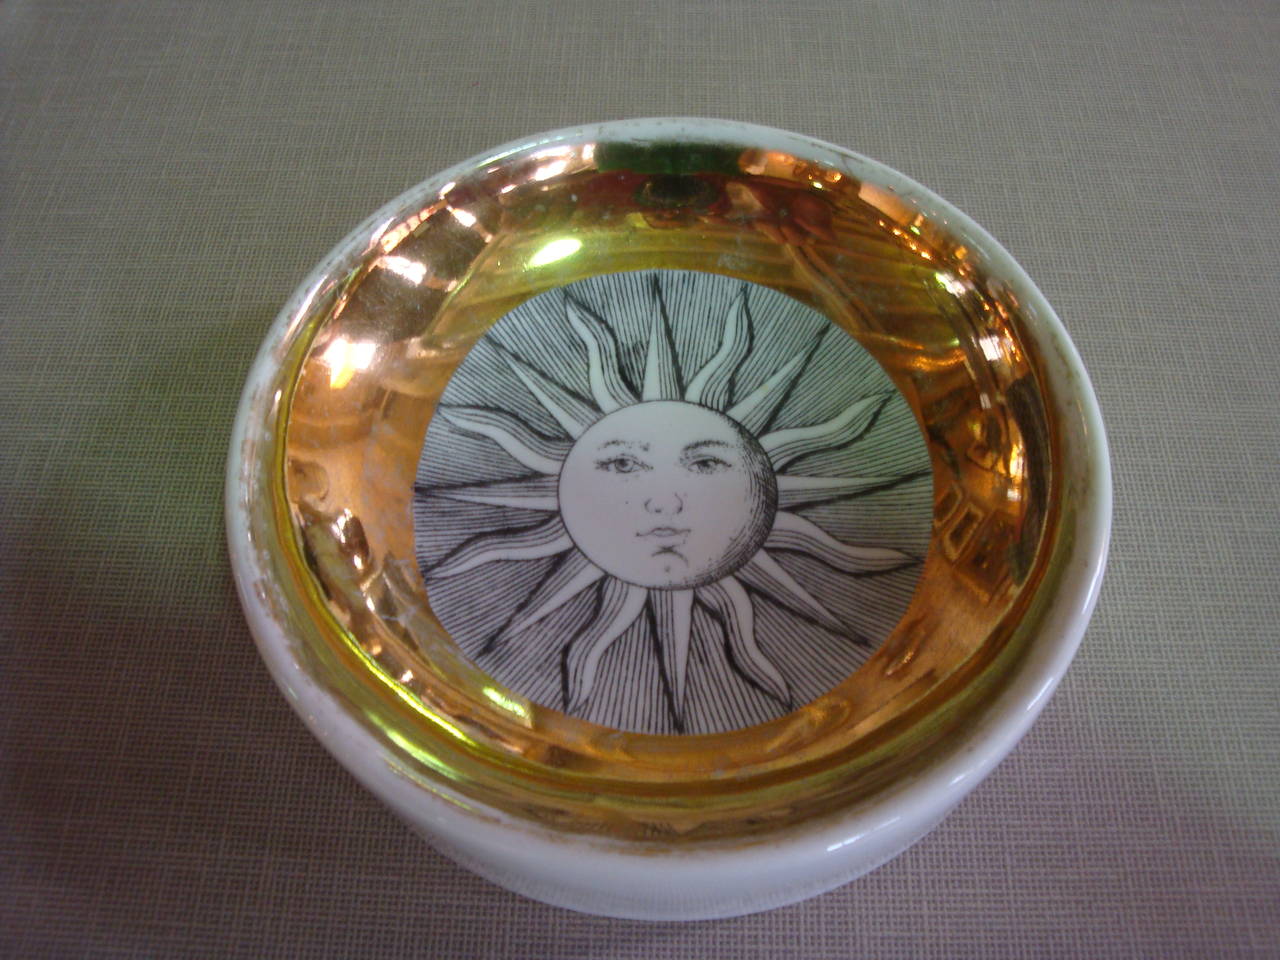 This is a fornasetti Soli e lune dish from 1950s and the padlock paperweight